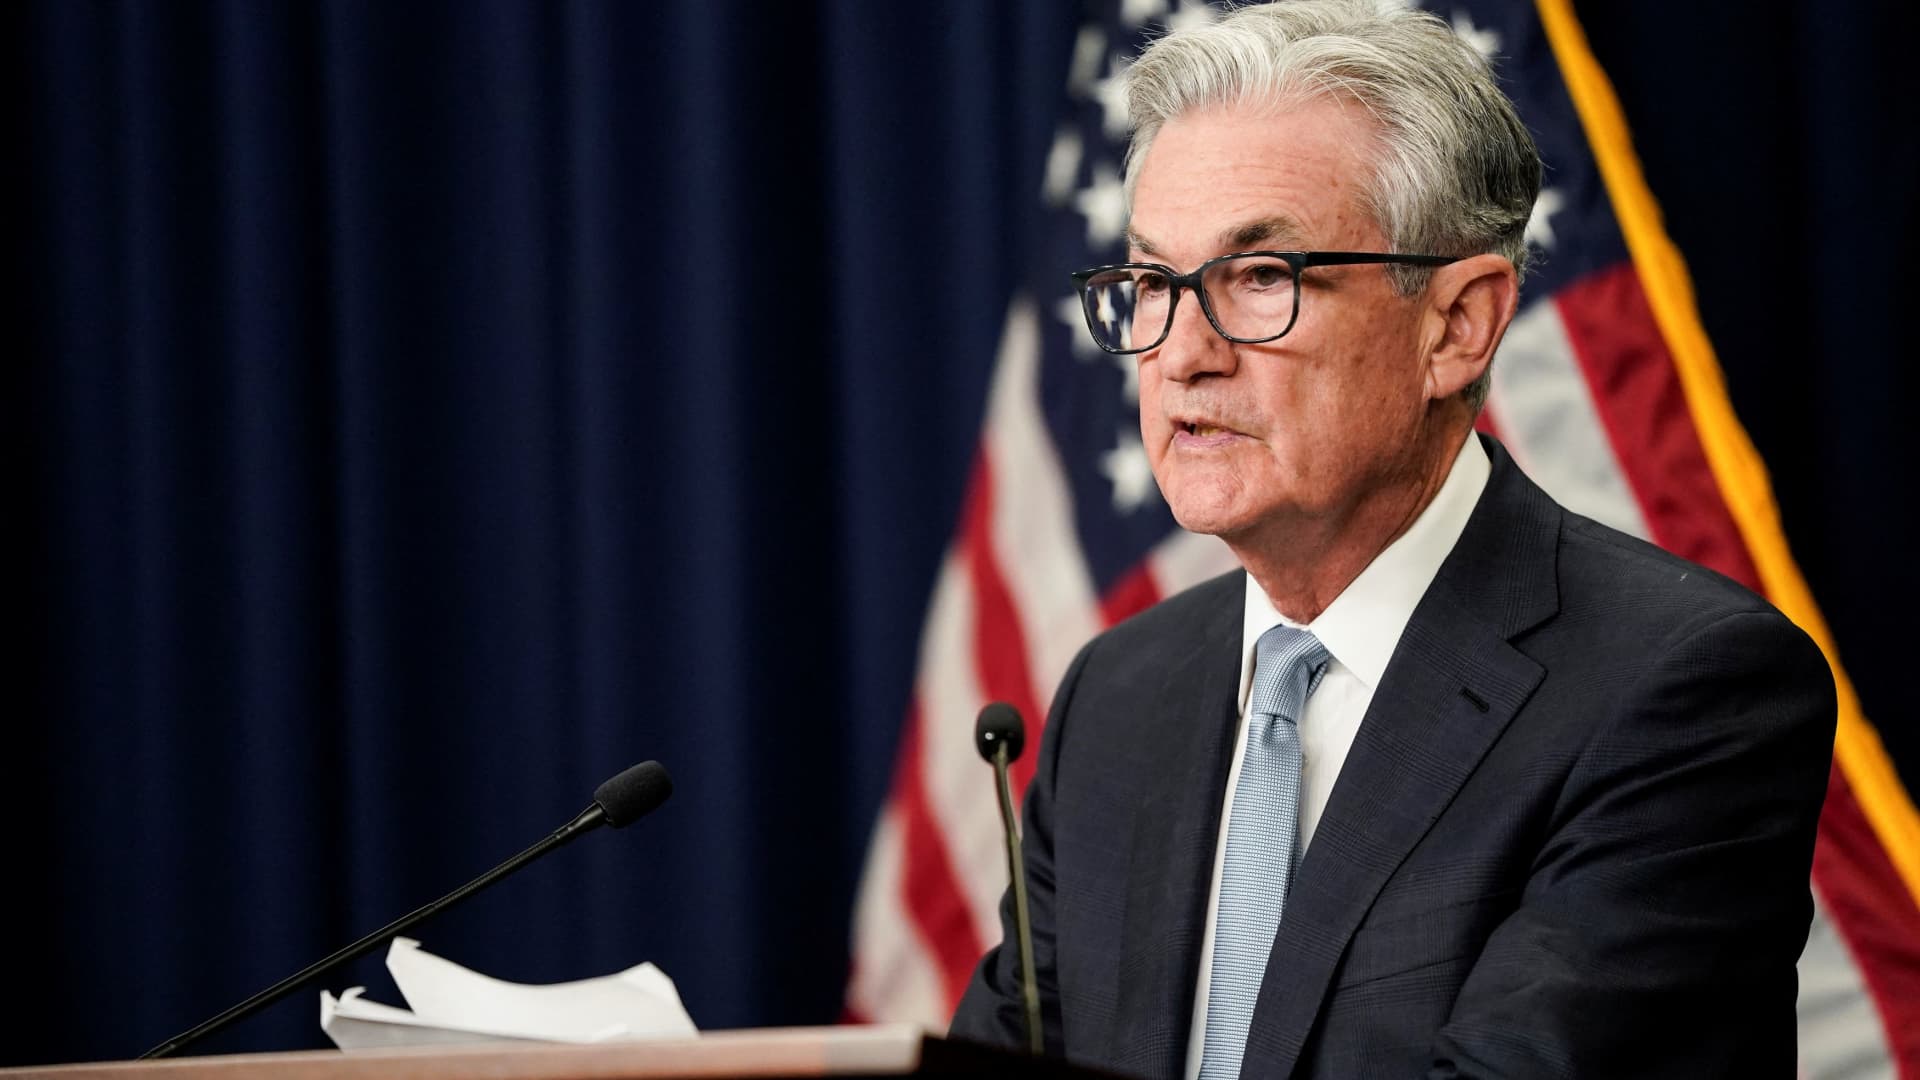 Full recap of the Federal Reserve’s rate hike and Powell’s market-boosting comments